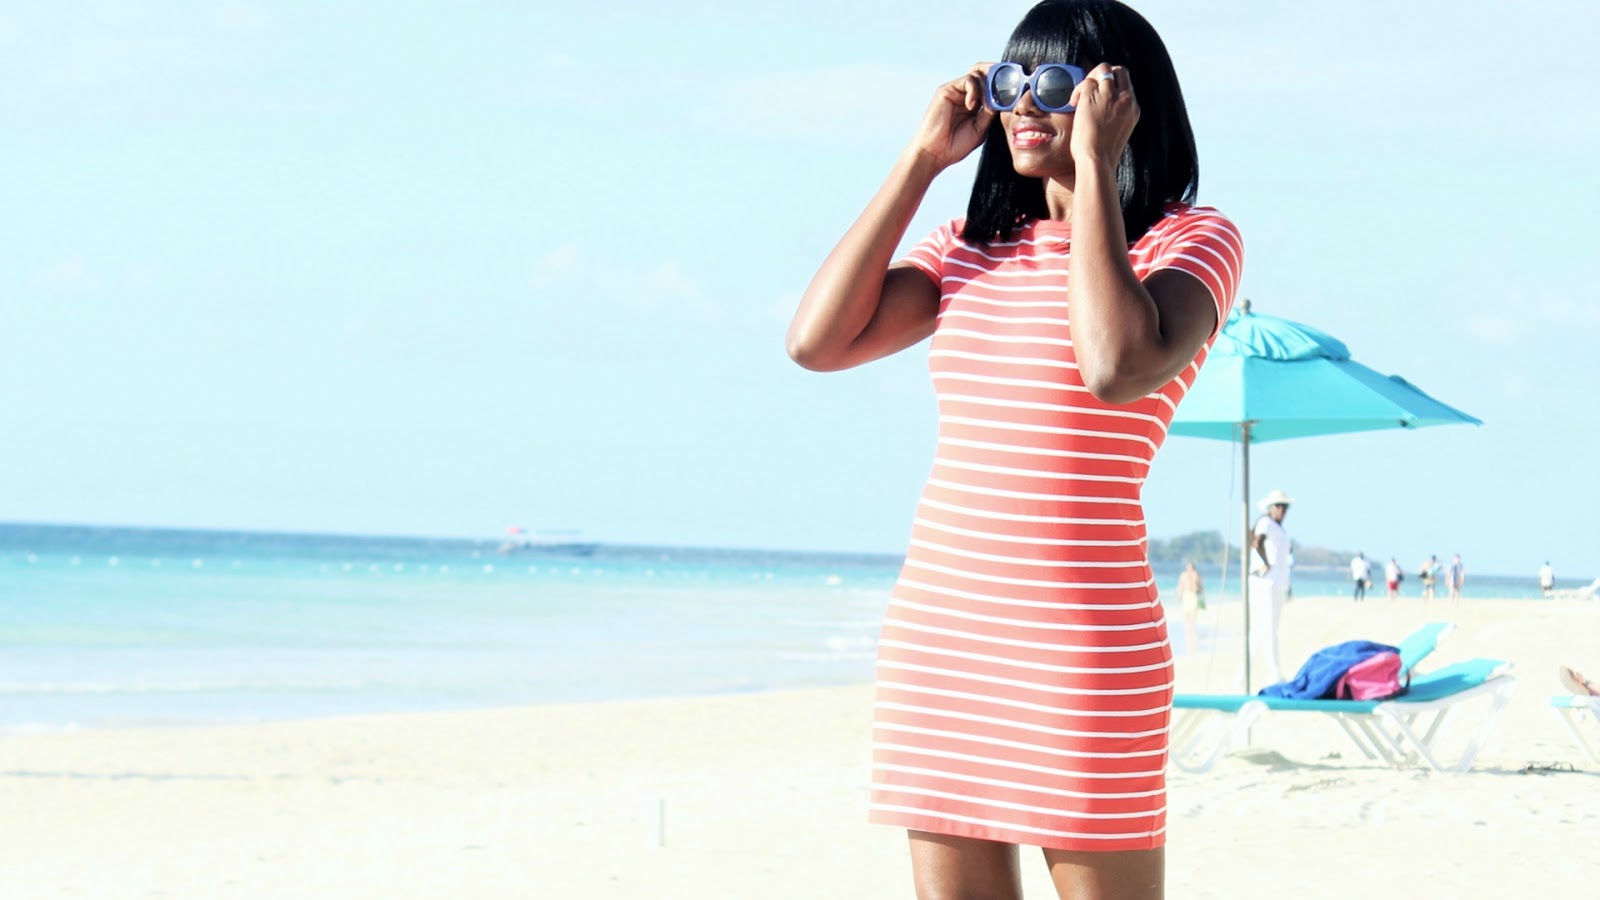 THE OLD NAVY STRIPED DRESS THAT TOOK ME BY SURPRISE